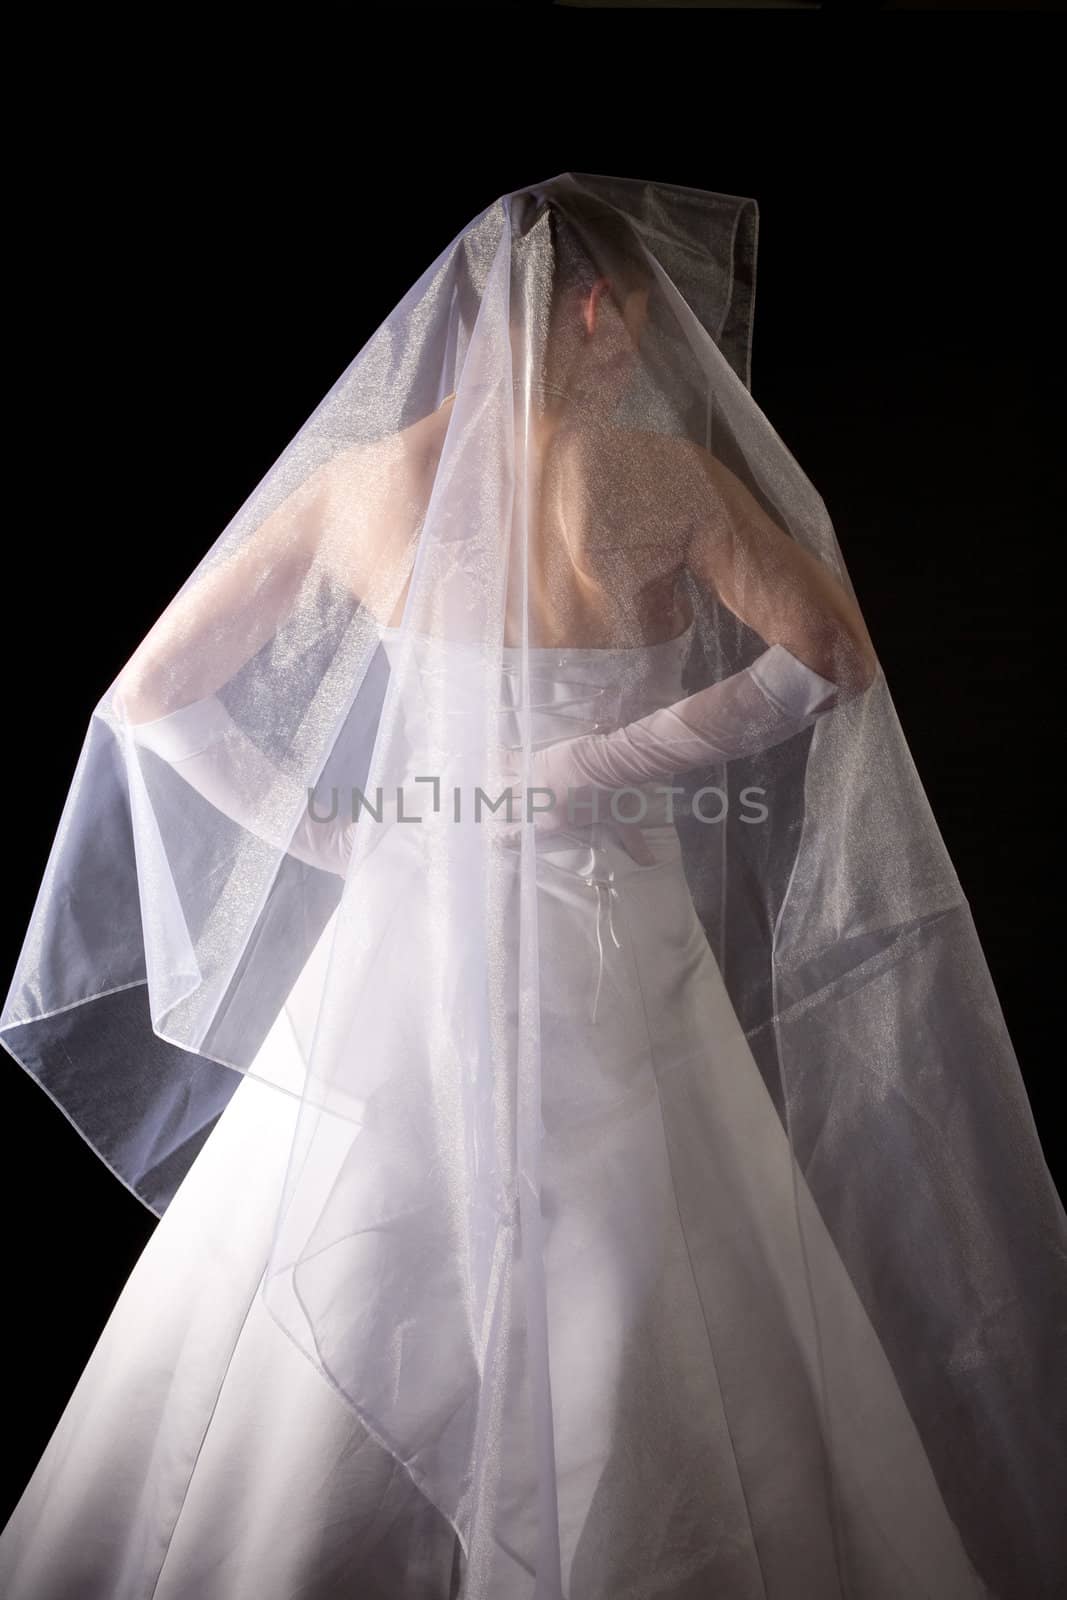 young women in the veil and white dress